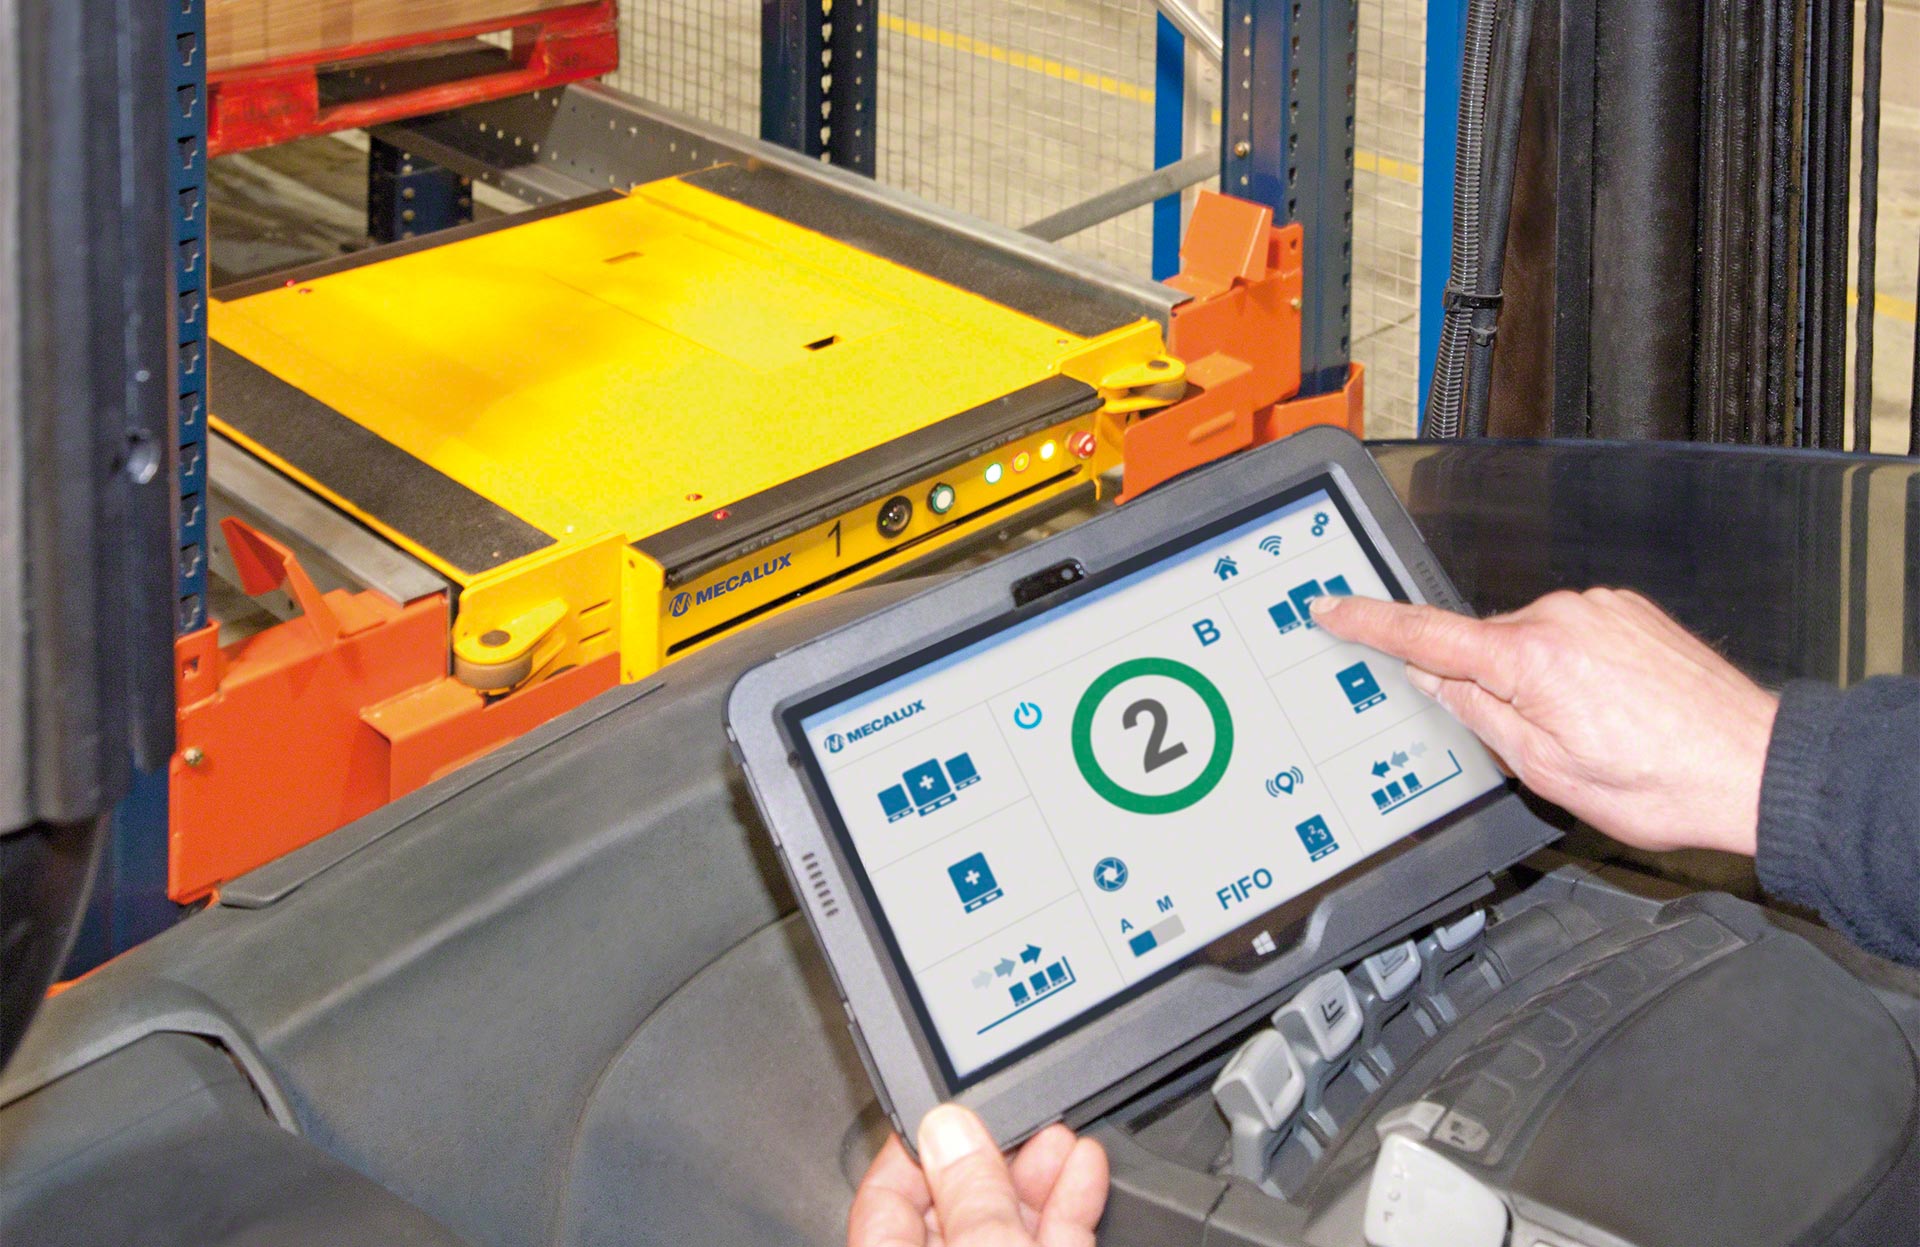 The system is controlled via a touch tablet with intuitive, user-friendly software